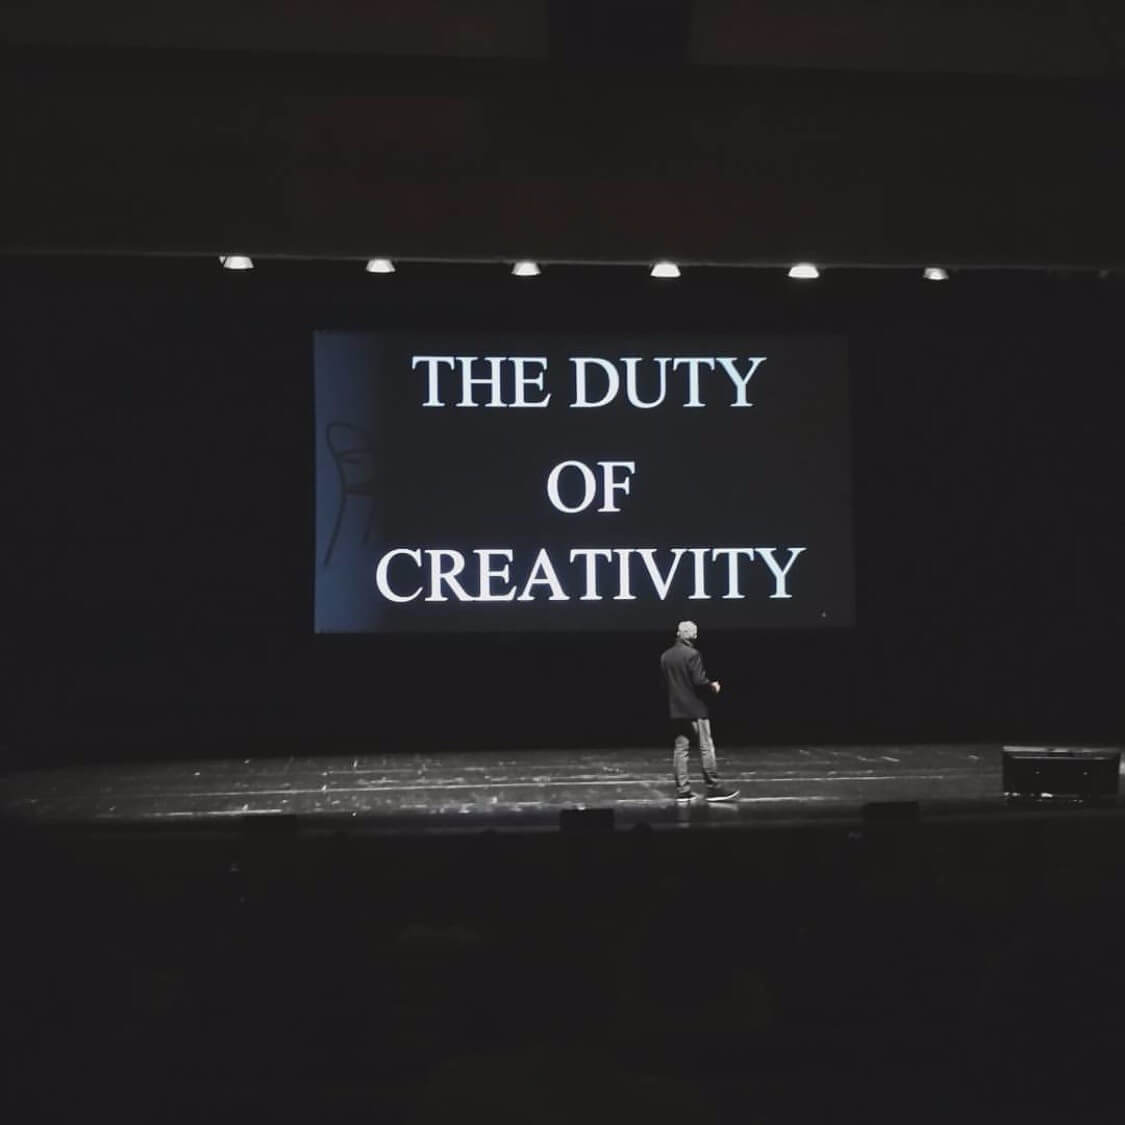 Philippe Starck shared his vision on the duty of creativity at EXD’17 - 